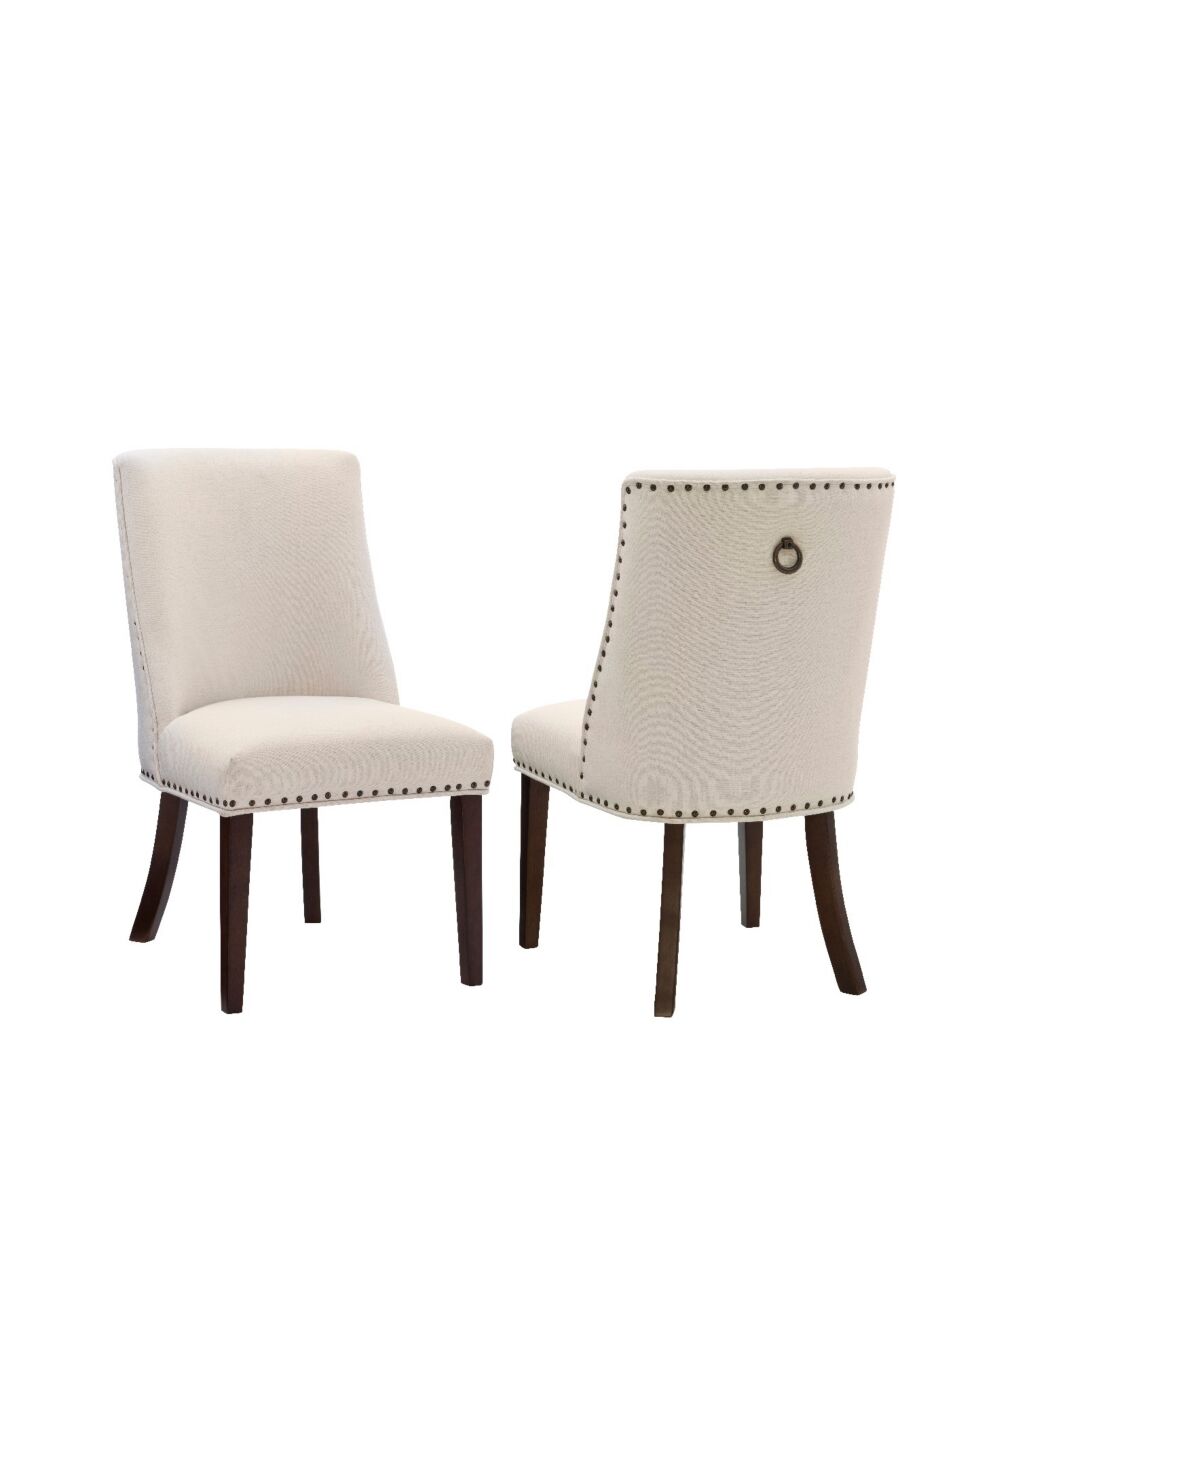 Linon Home Decor Powell Furniture Allard Upholstered Dining Chairs - Set of 2 - Espresso, Natural